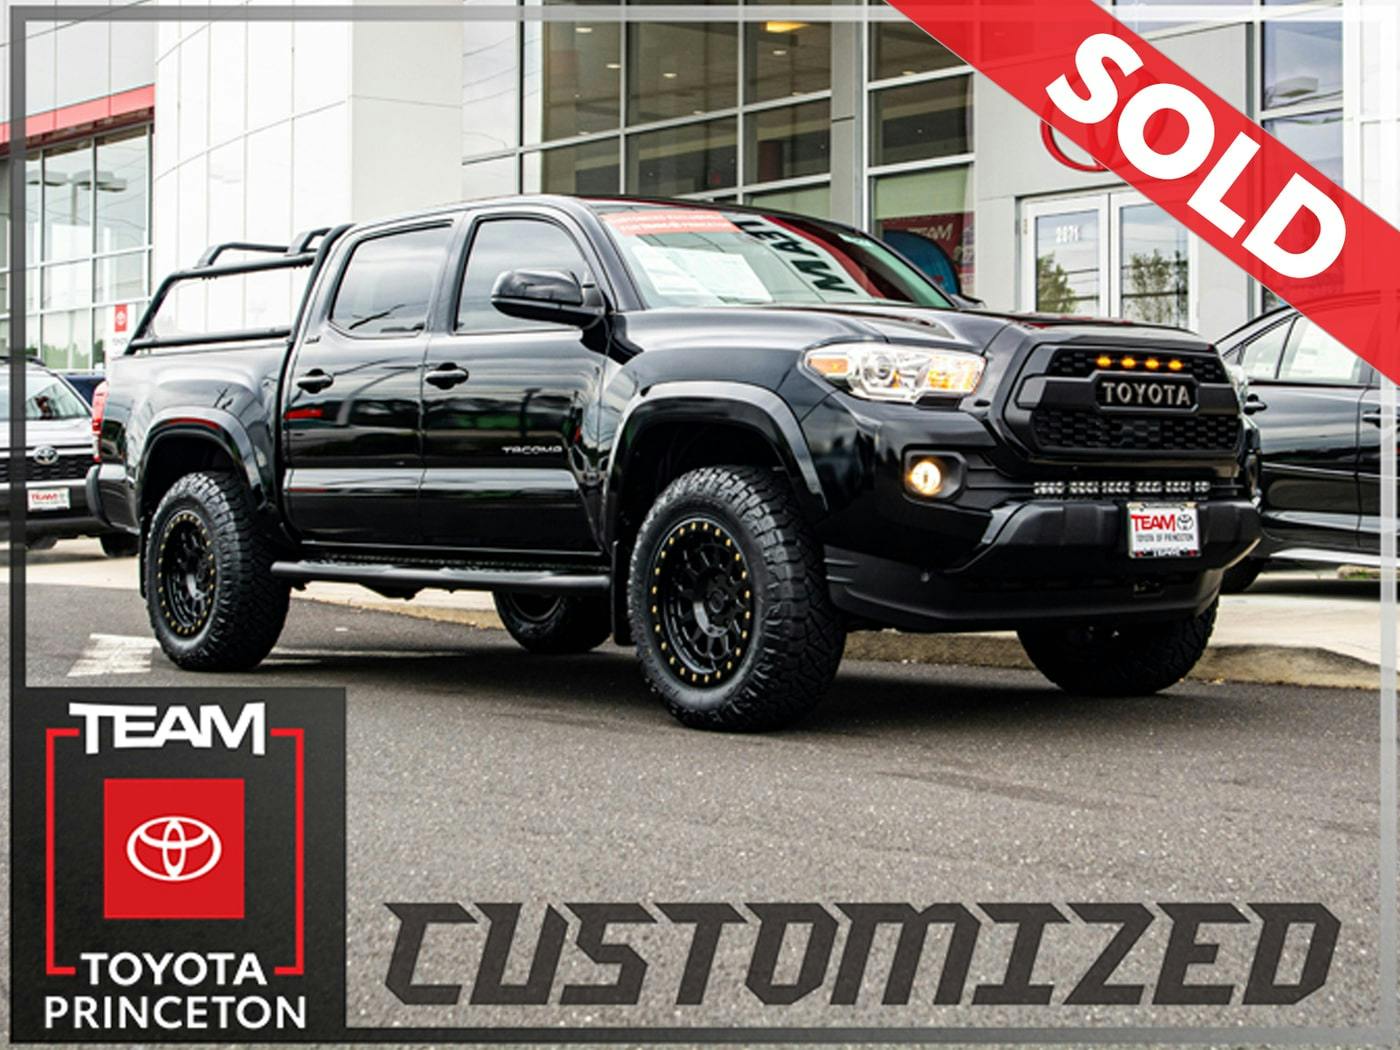 Team Toyota Customized New Vehicles blacked out tacoma